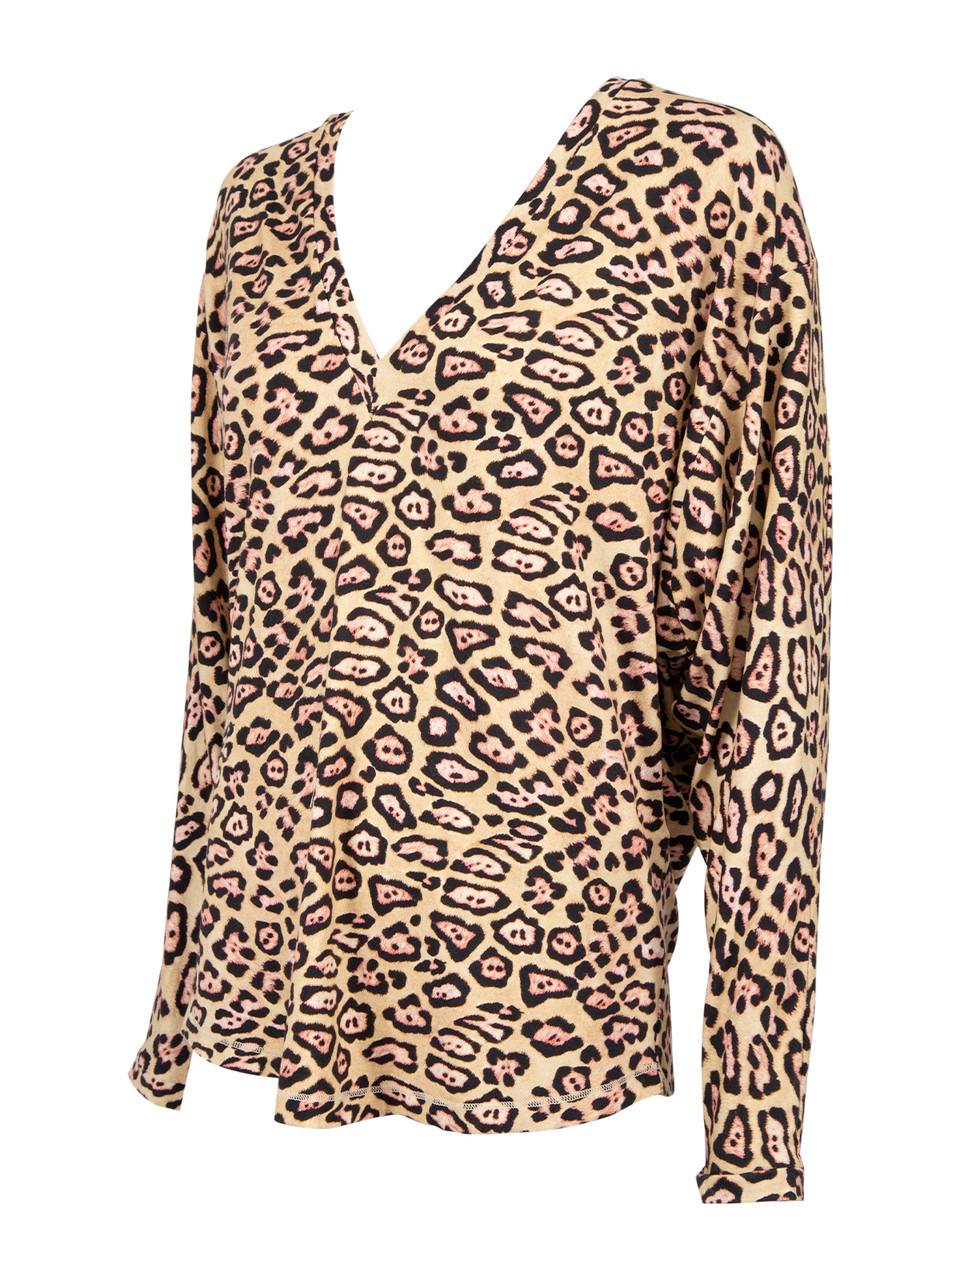 Givenchy Women's Leopard Print Long Sleeved Blouse For Sale 1